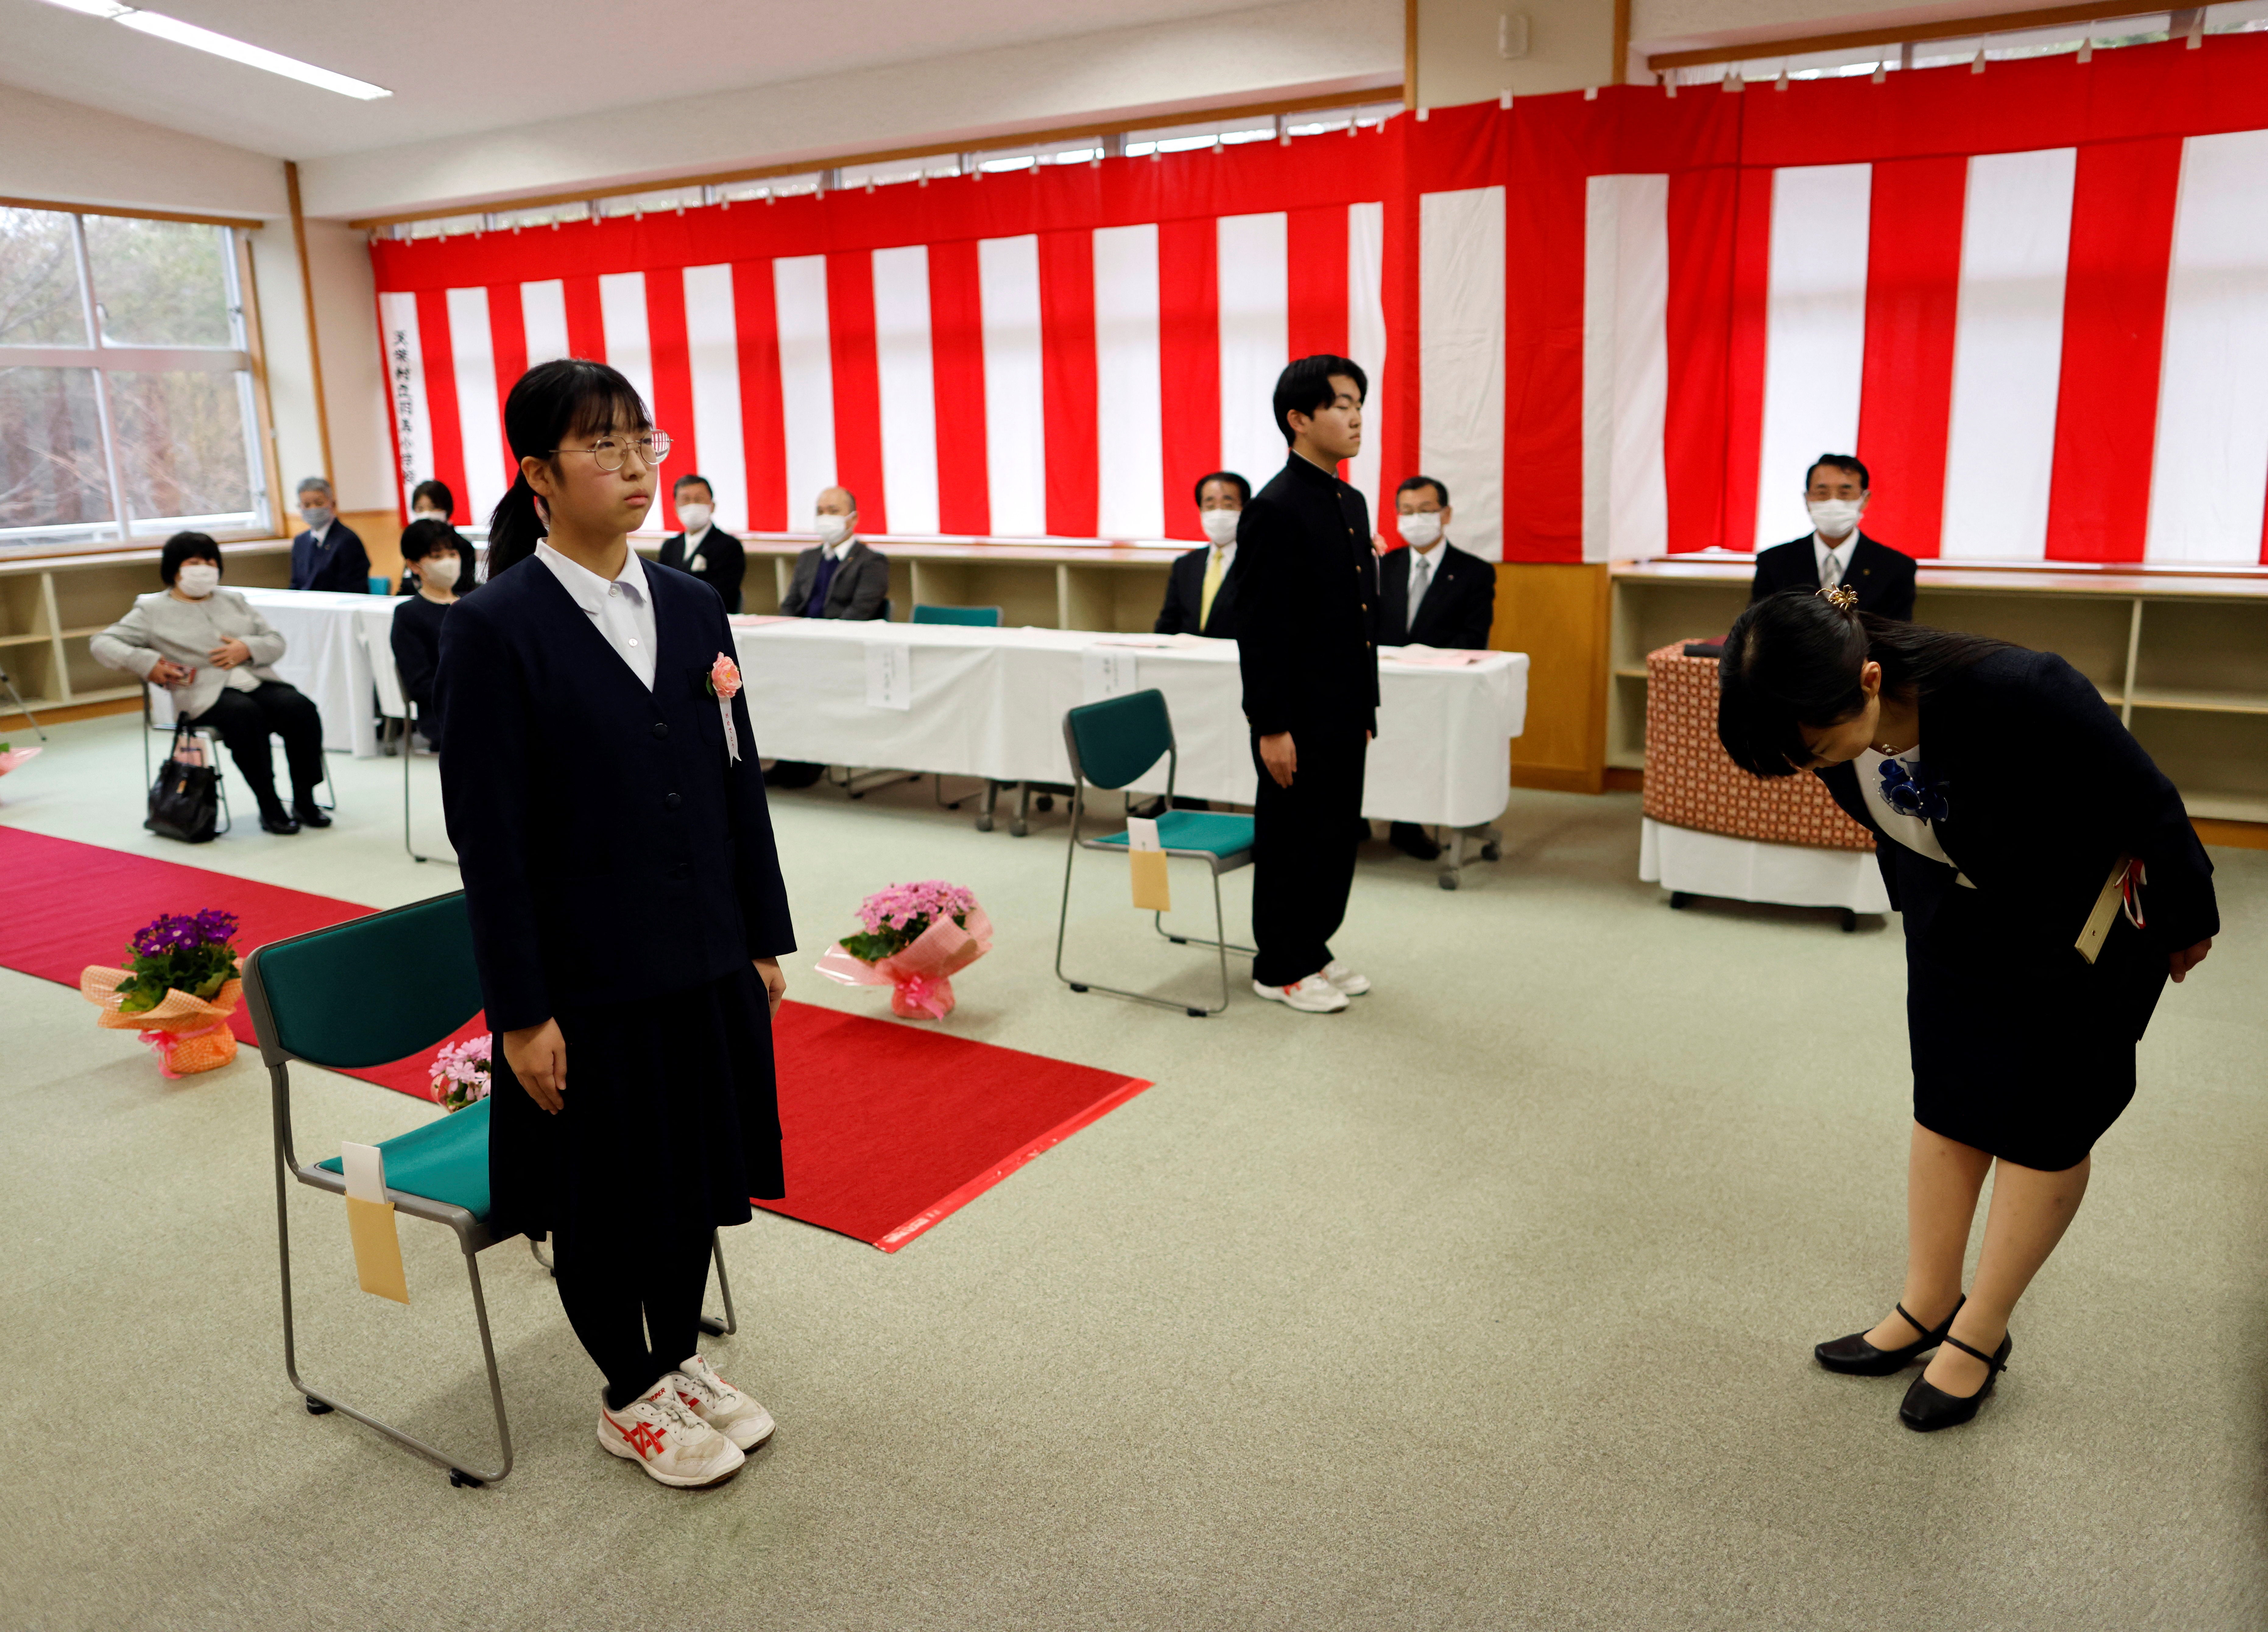 Eita Sato, 15, and Aoi Hoshi, 15, the only two students at Yumoto Junior High School, attend their graduation ceremony, in Ten-ei Village, Fukushima prefecture